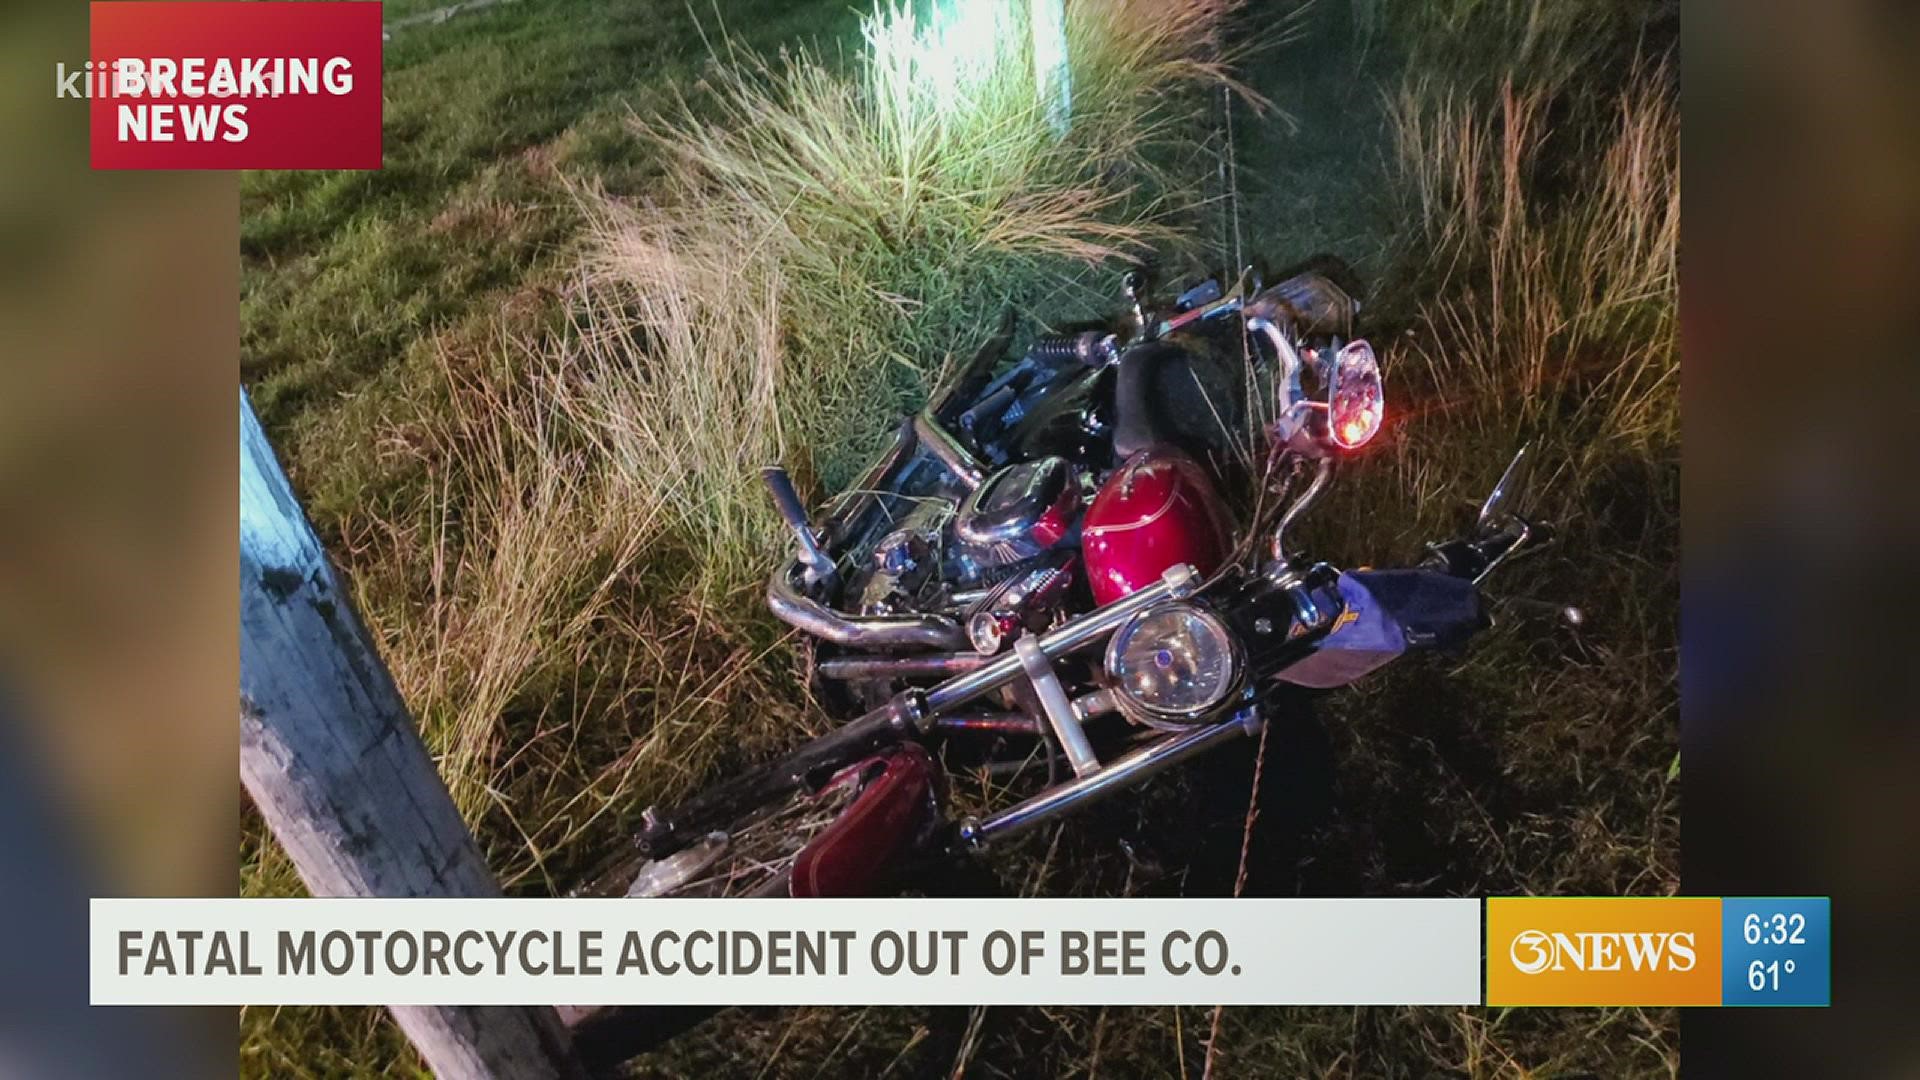 Investigators said Randall Worley of Beeville was thrown from his motorcycle Saturday night after hitting a cow along FM 796 just southwest of Beeville.